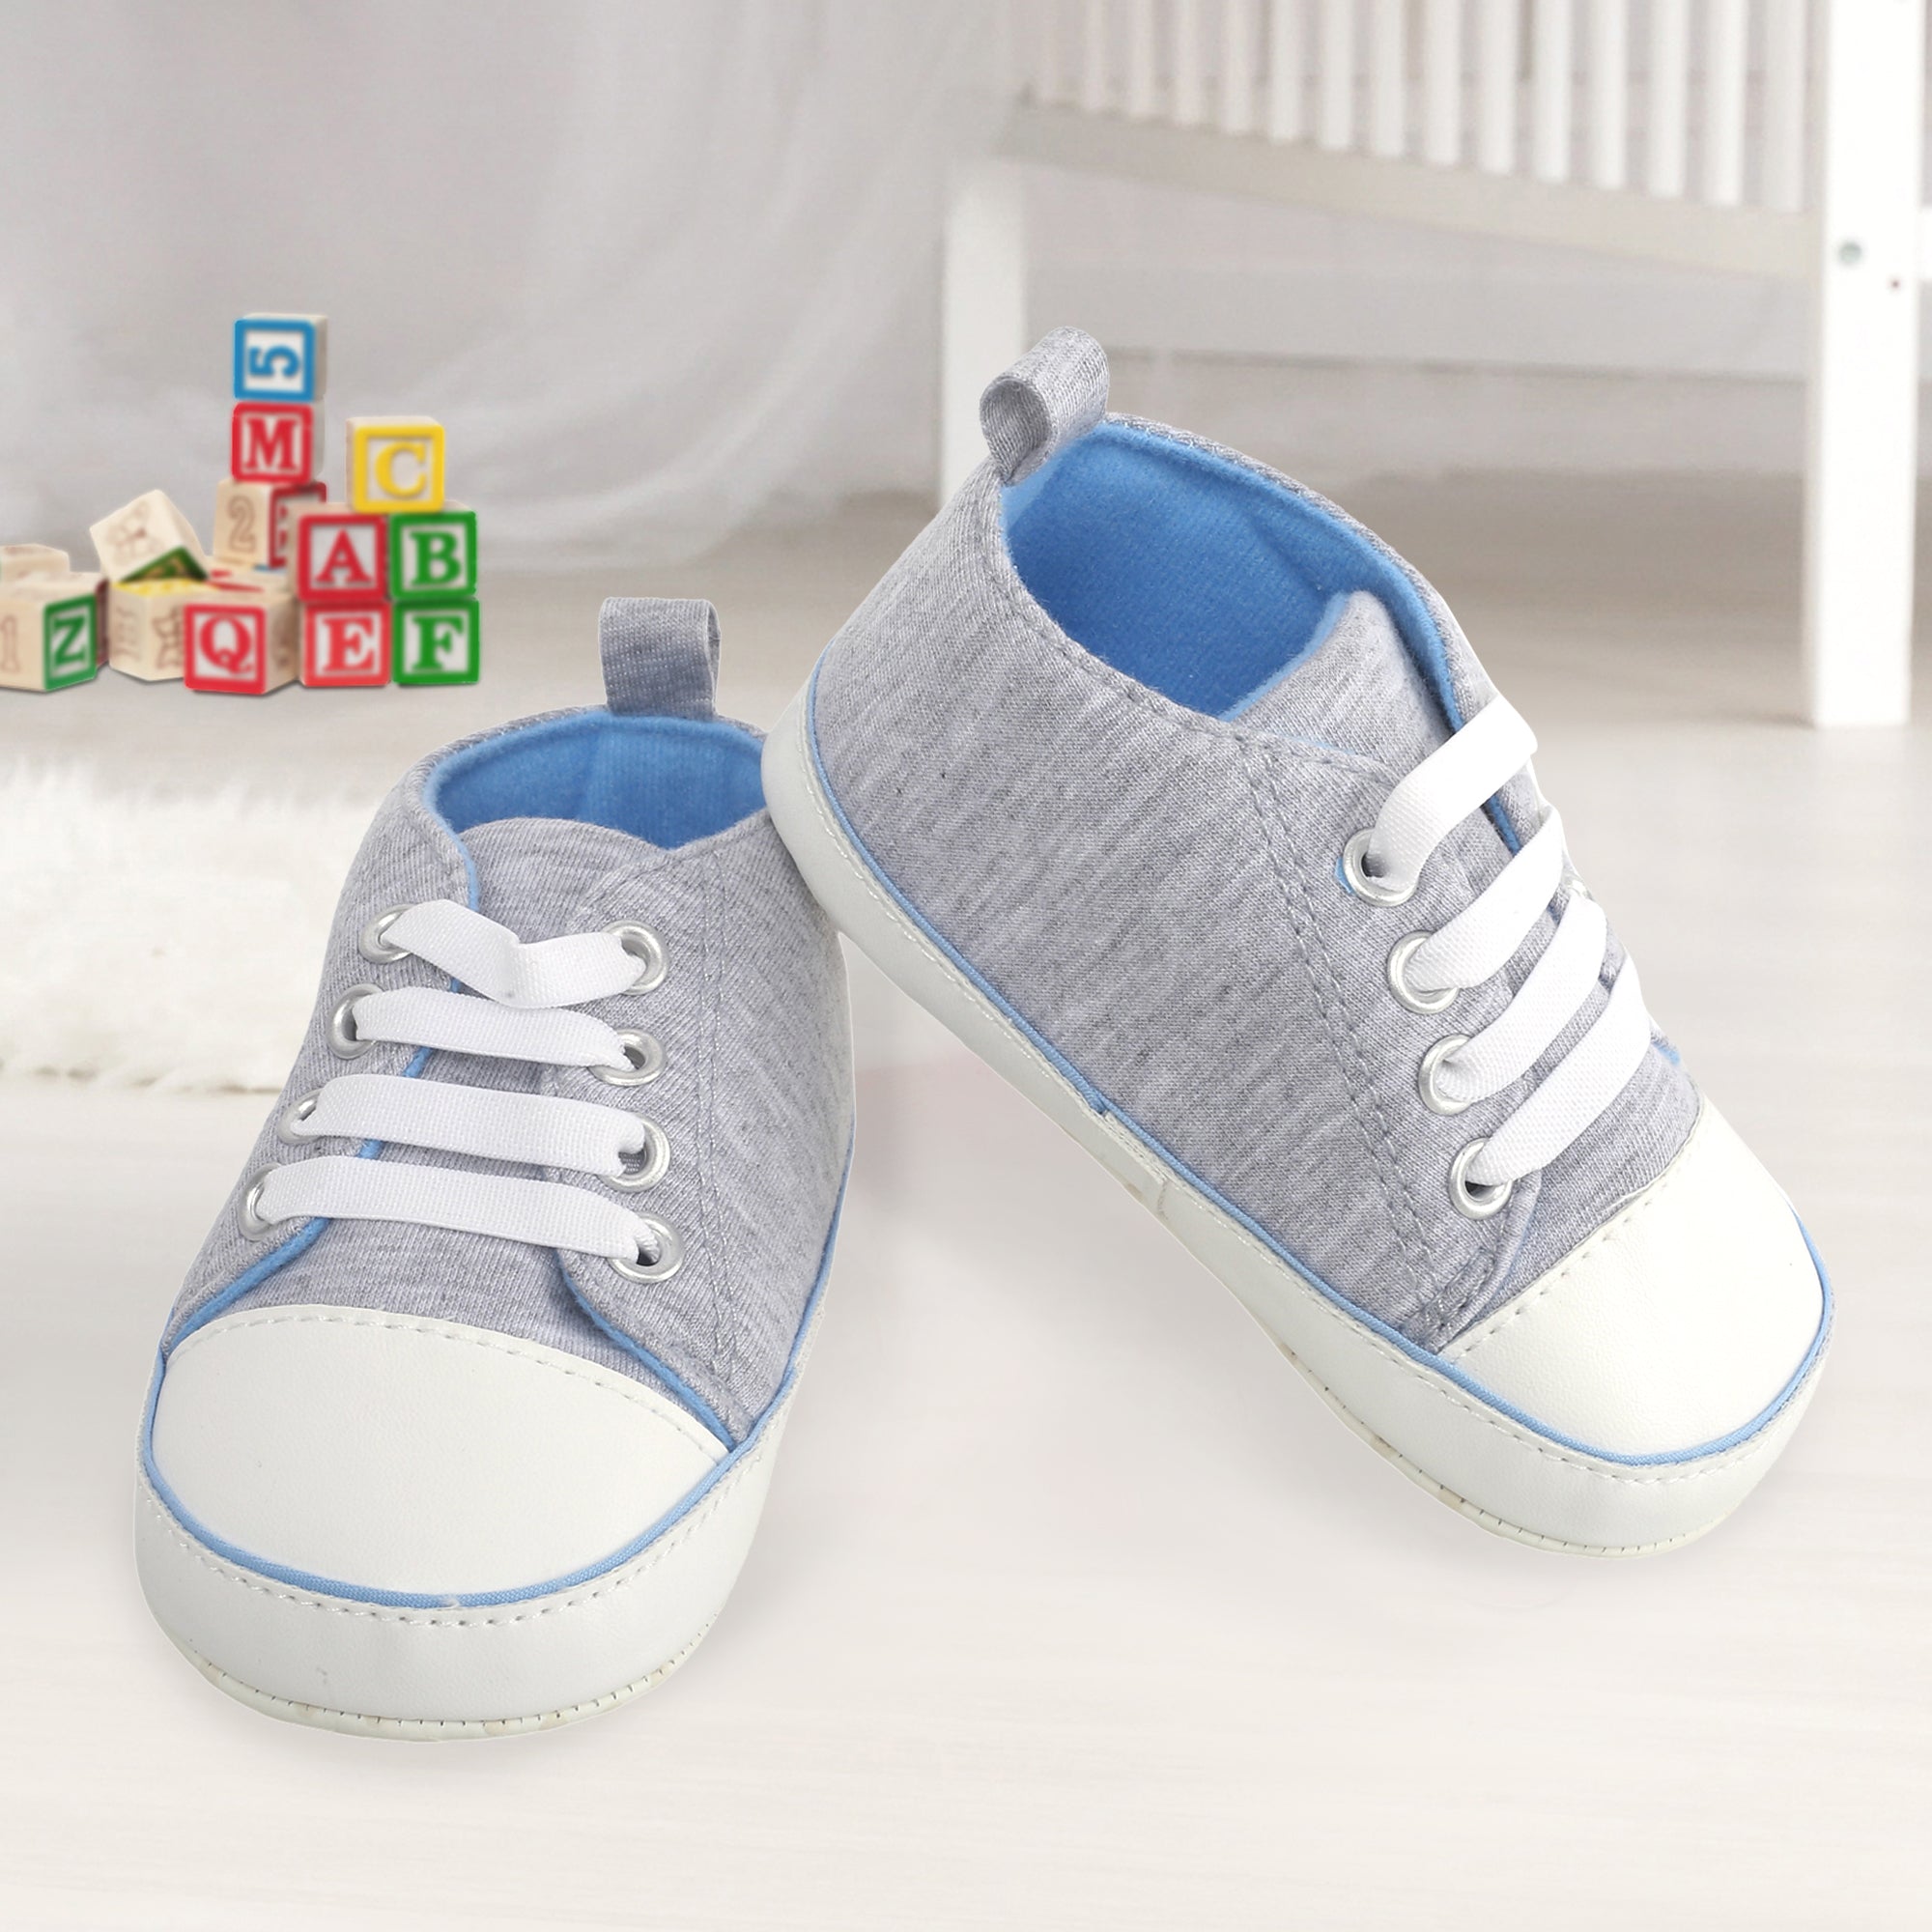 Baby Moo Grey Lace Up Sneakers - Baby Moo